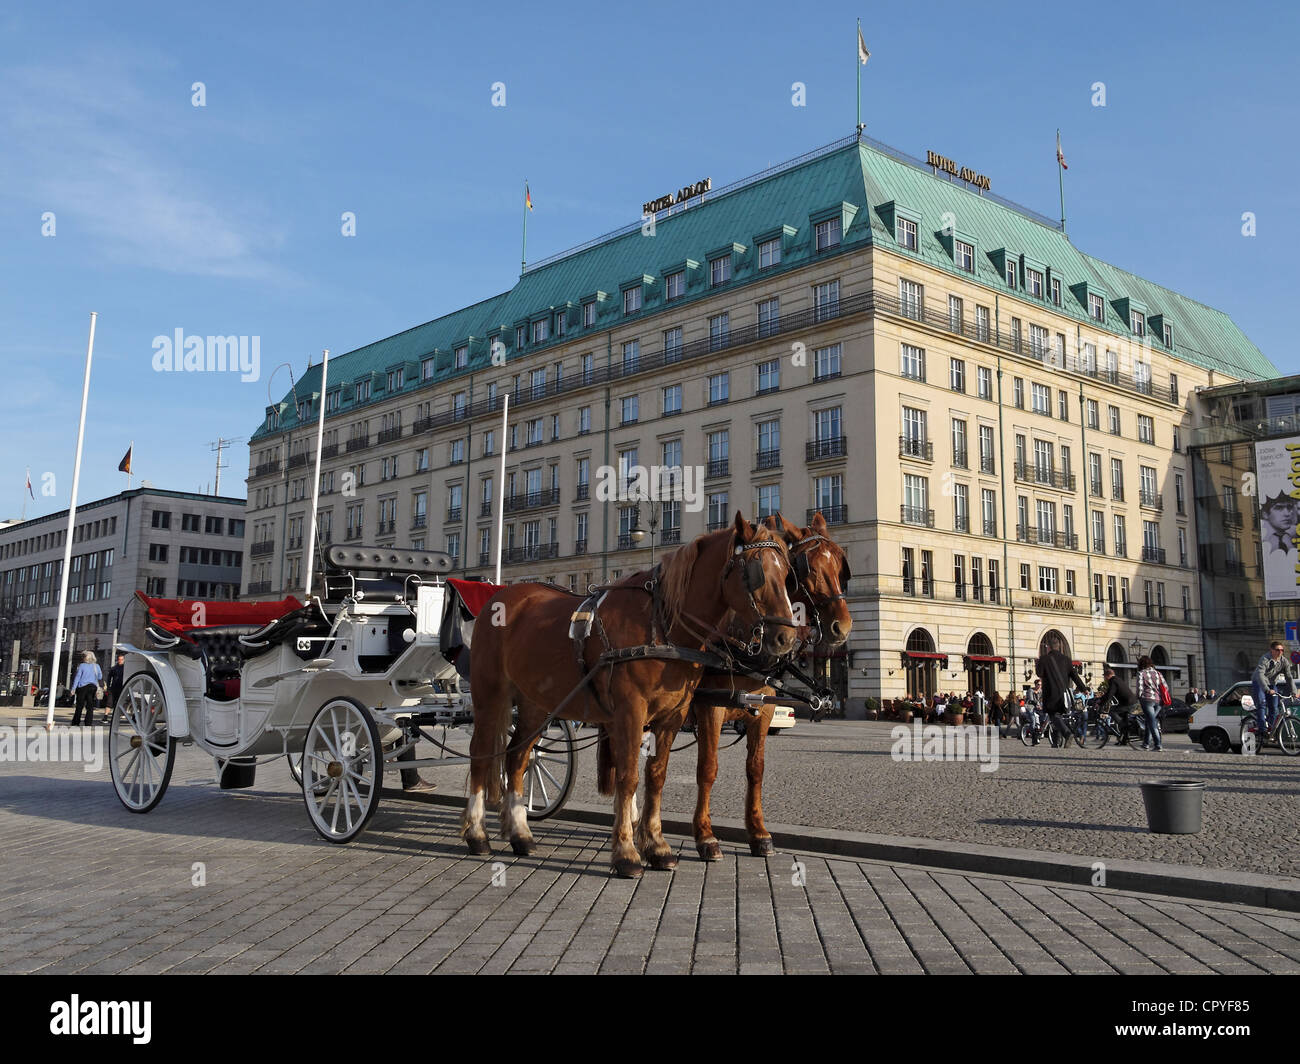 Horses and carriage in front of Hotel Adlon, Unter den Linden, Berlin, Germany. Stock Photo